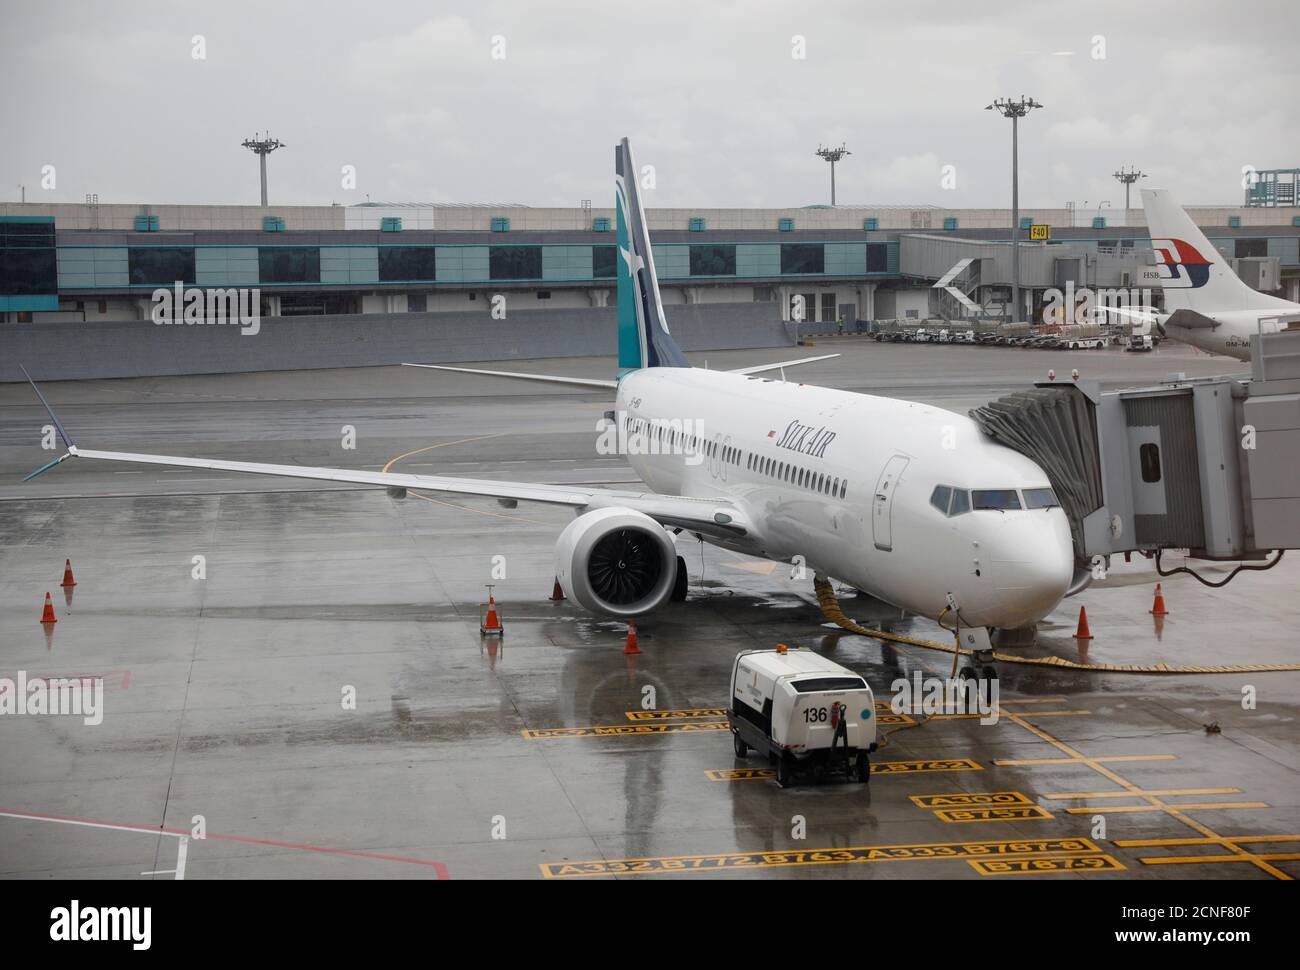 SilkAir's new aircraft, the Boeing 737 Max 8, sits on the tarmac at Changi Airport in Singapore October 4, 2017. REUTERS/Edgar Su Stock Photo